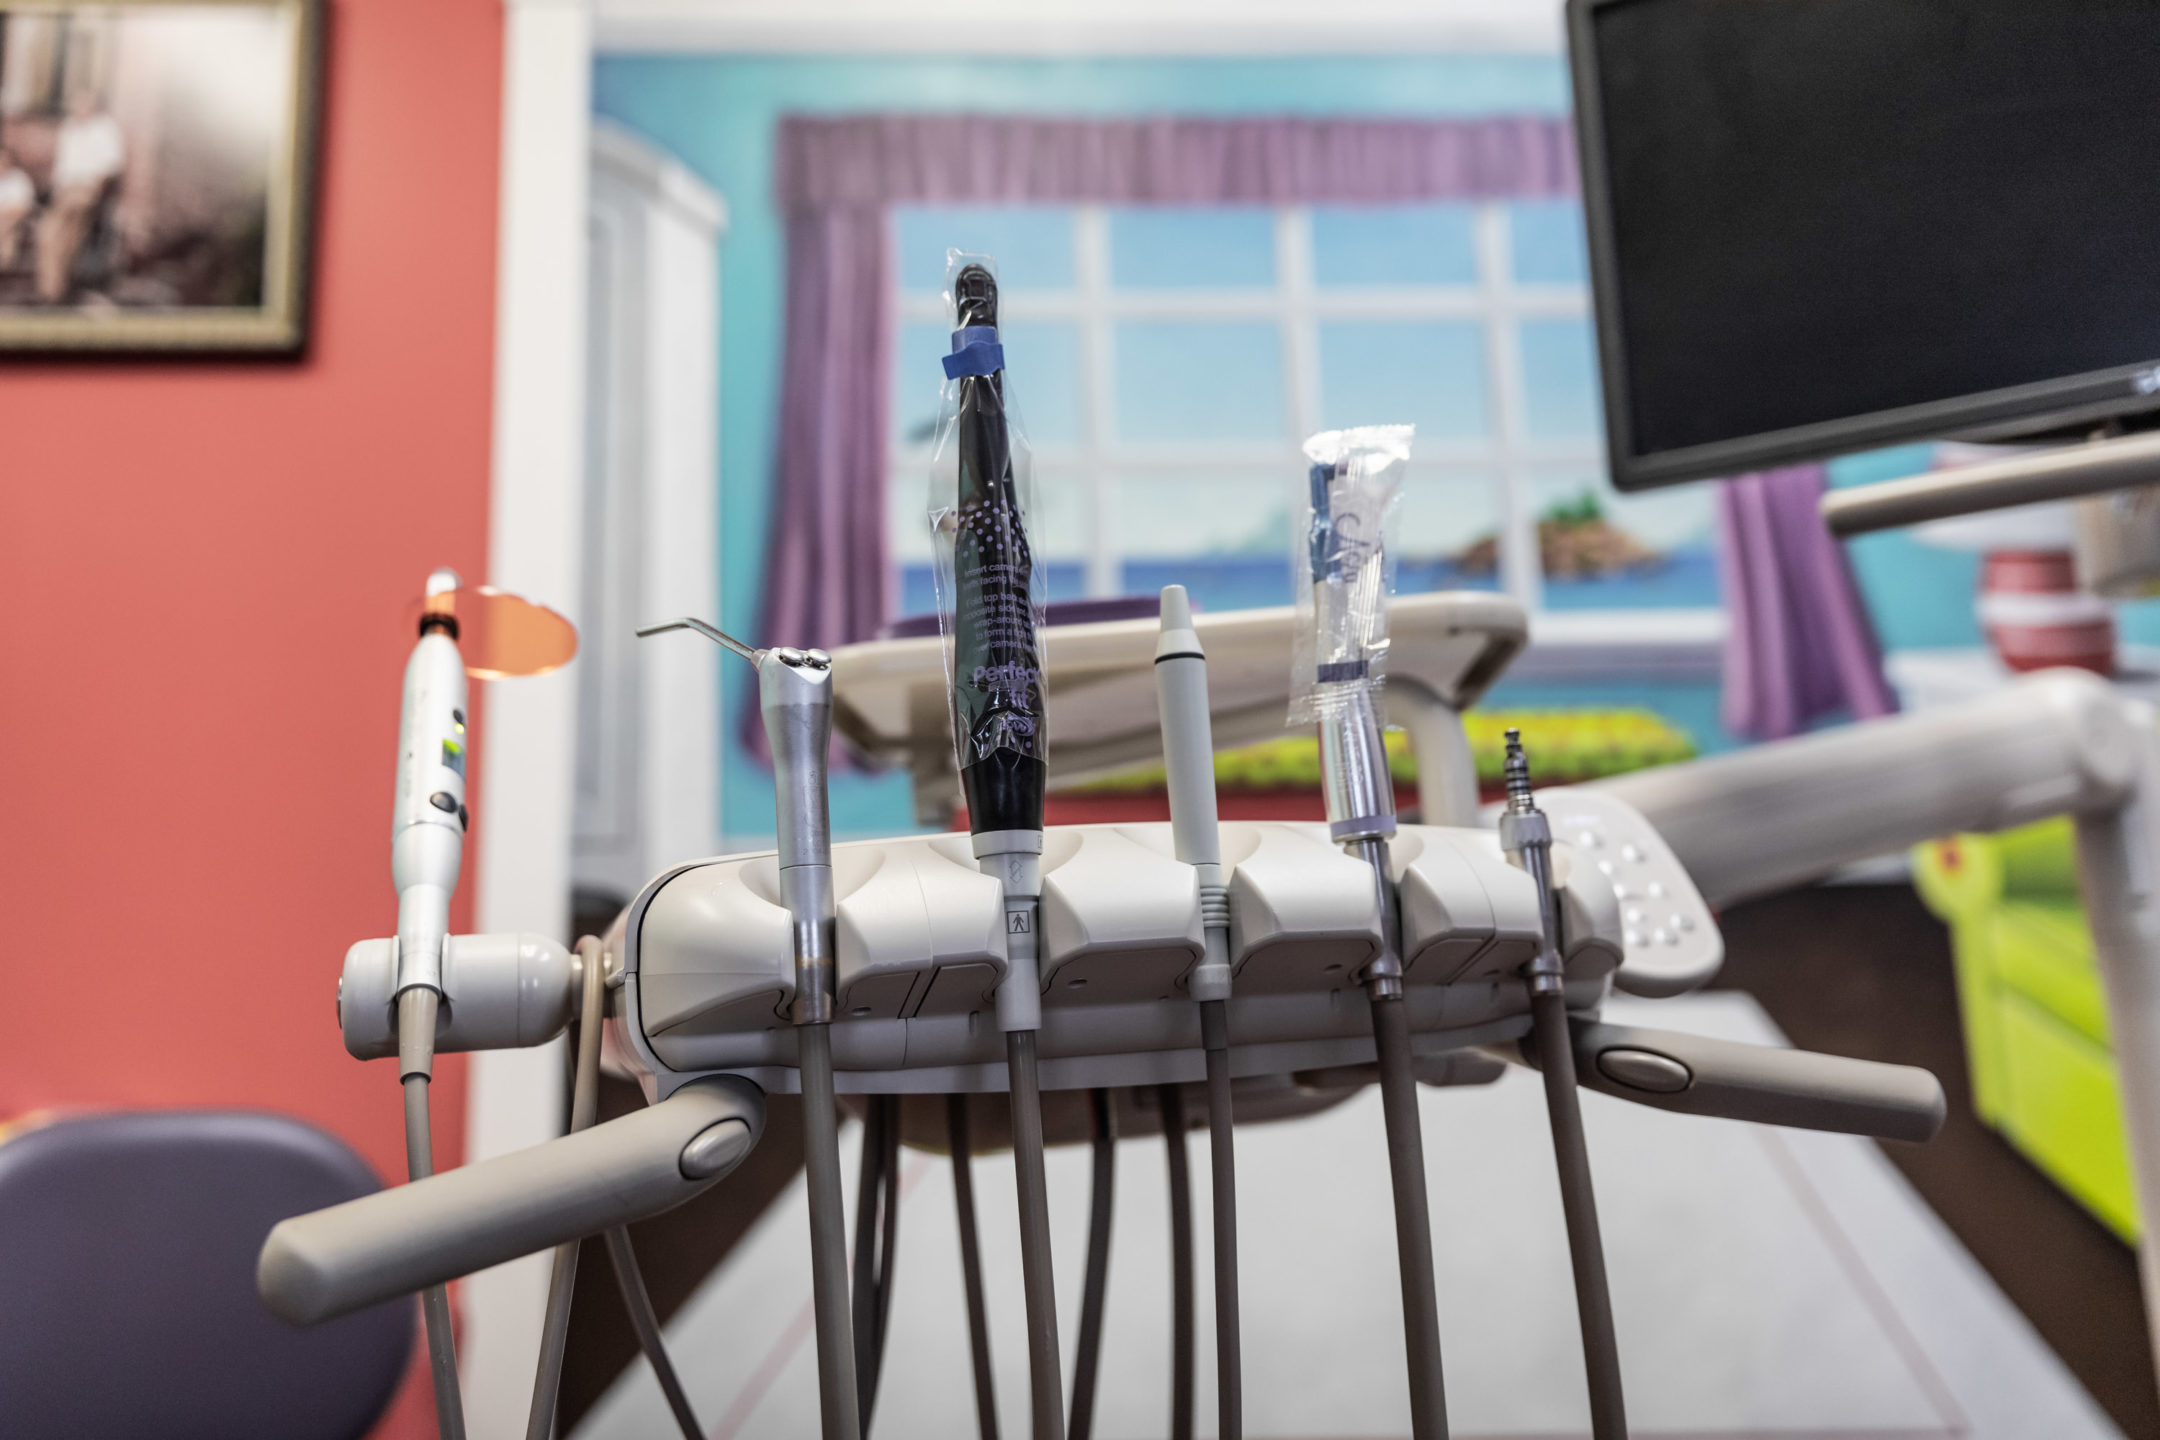 A collection of dental tools in the exam room.